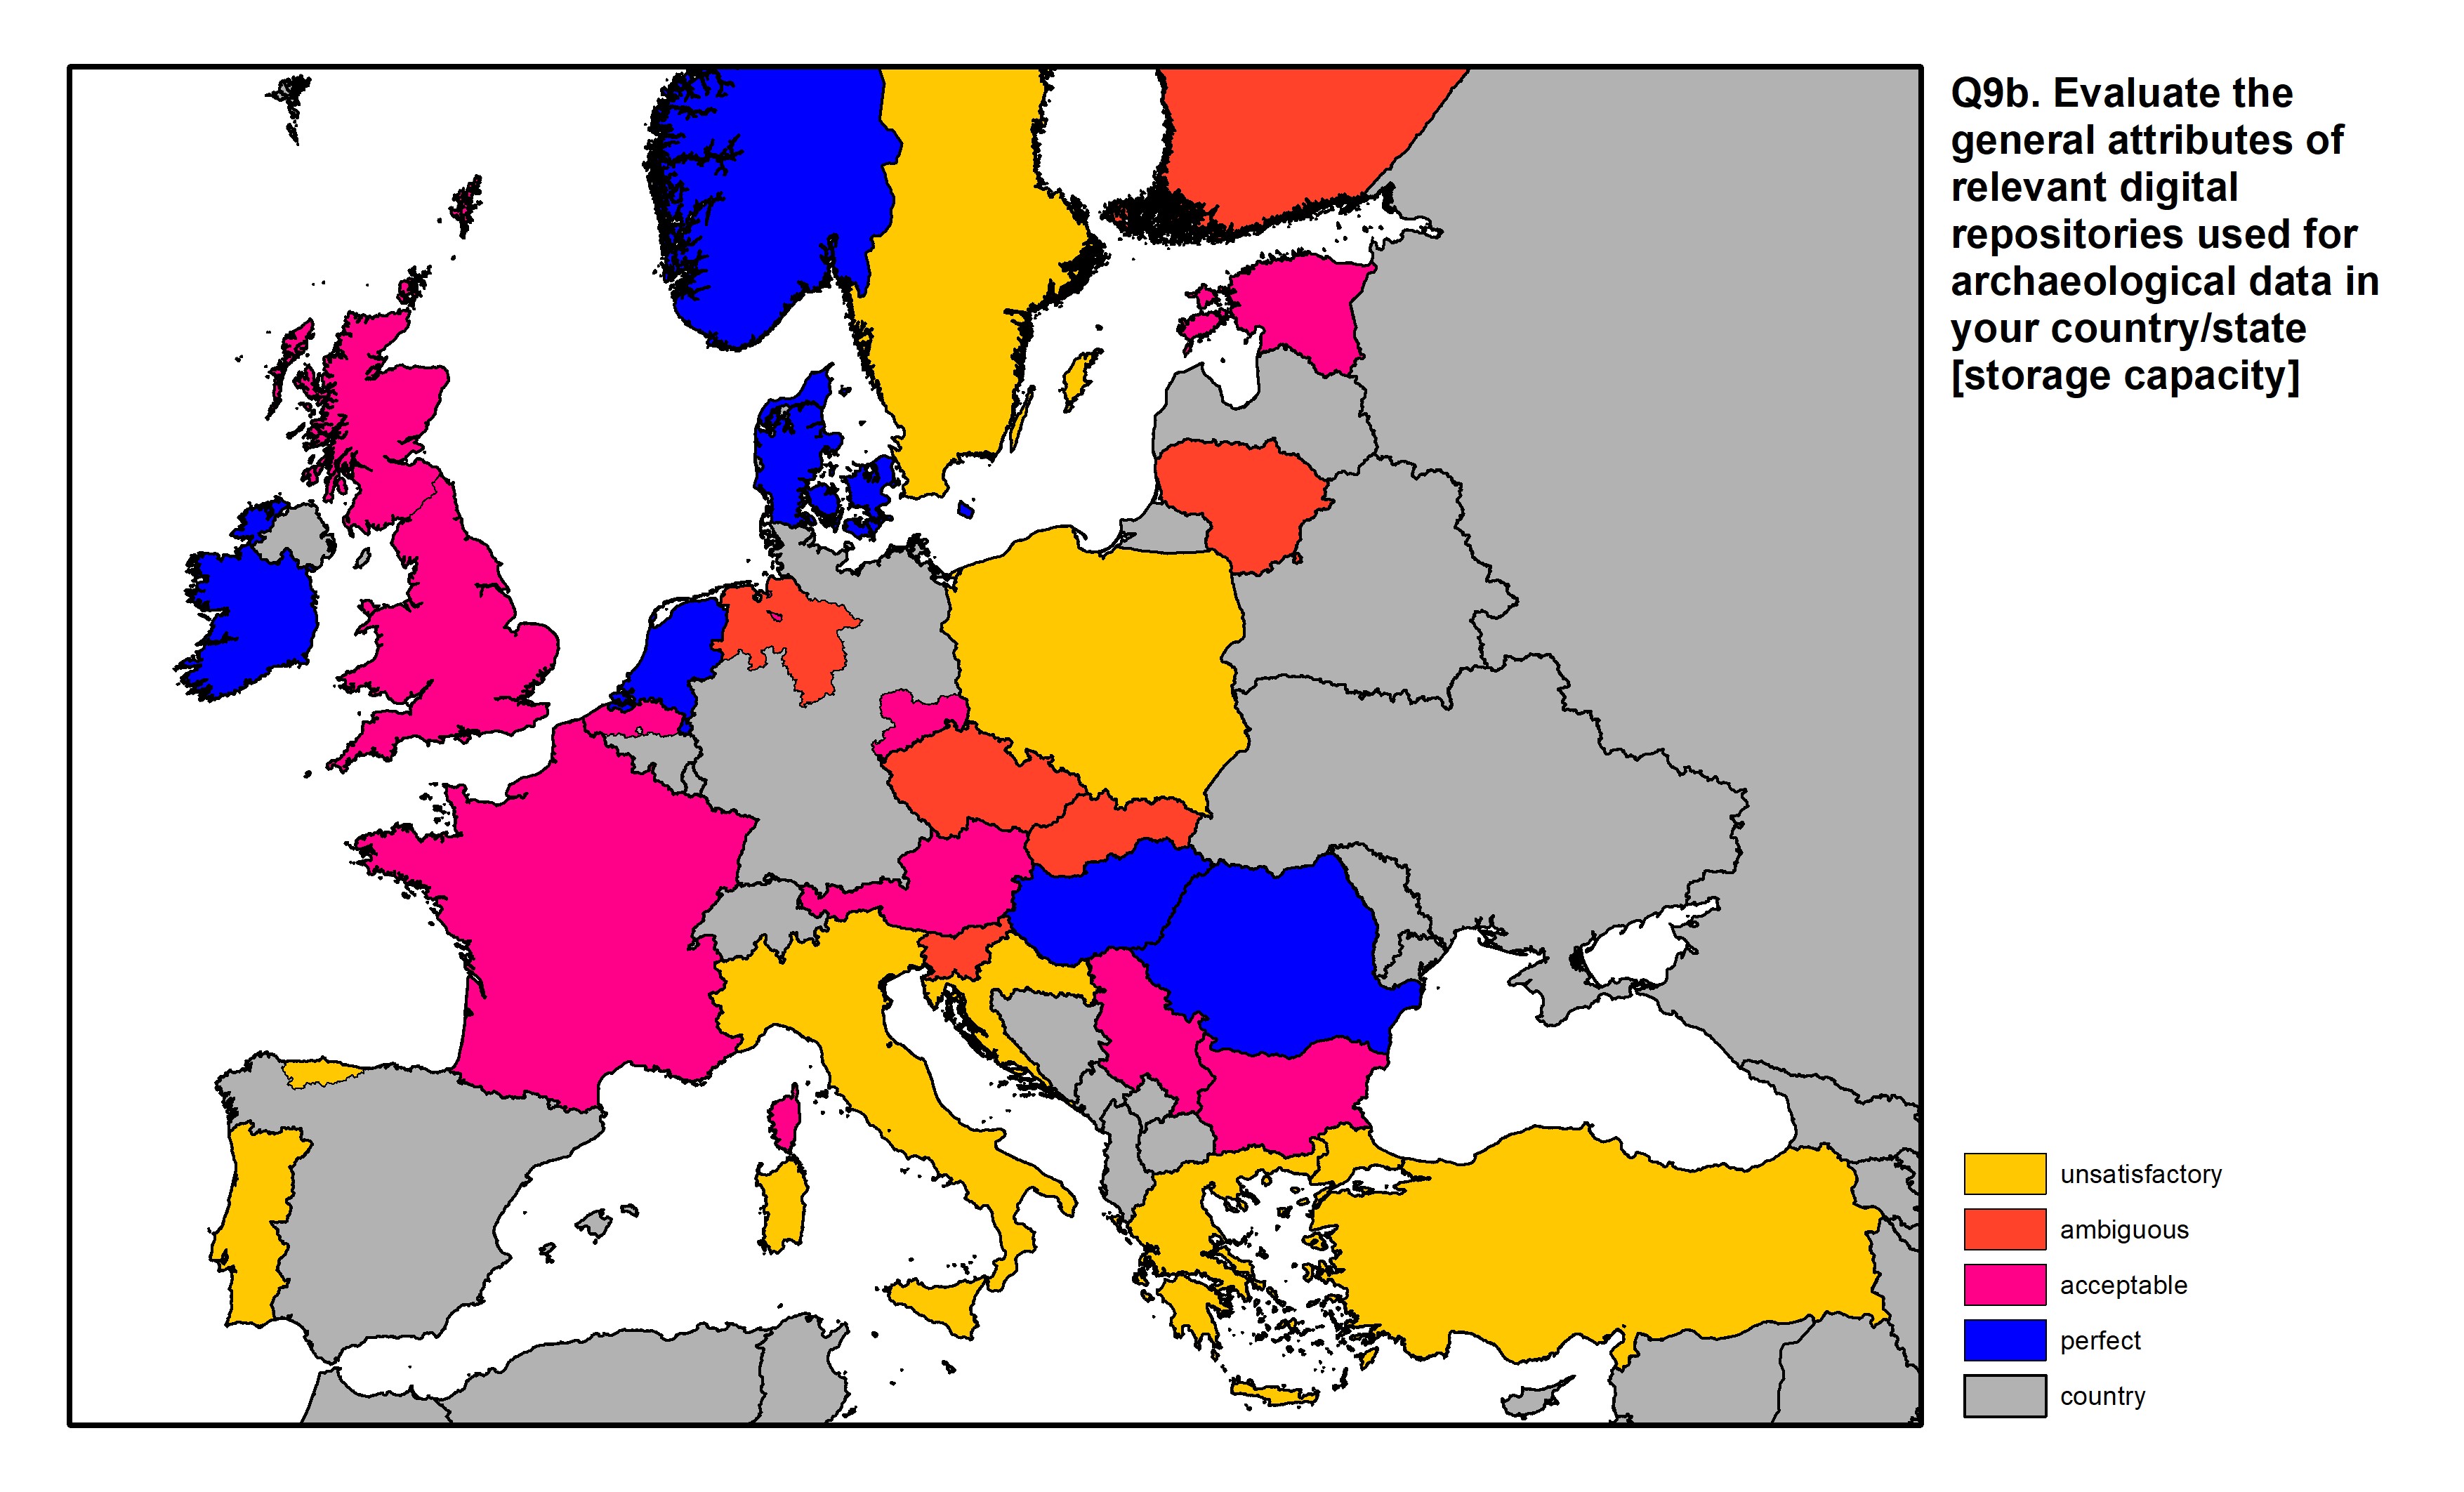 Figure 28: a map of Europe showing countries and regions in colour based on response rates to the survey question.